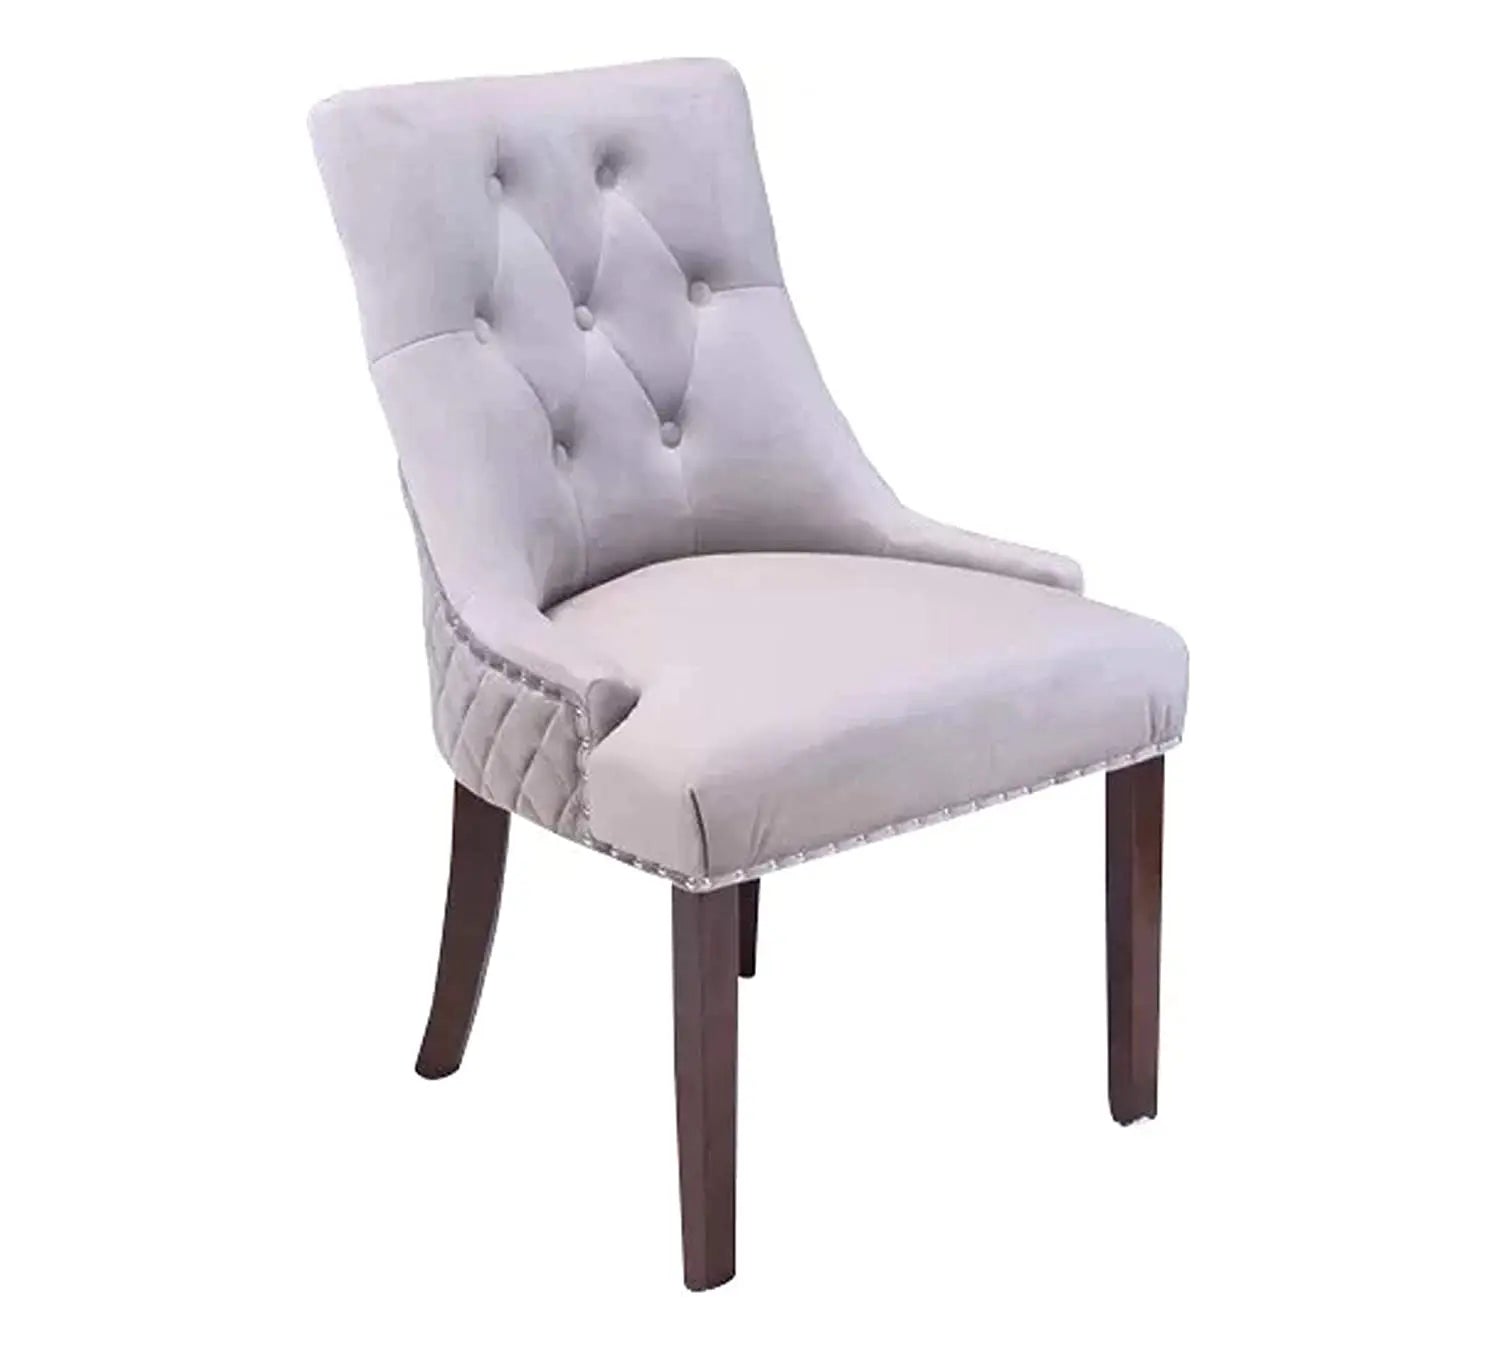 Dining Chair Beck- Wooden Dining Chair Handmade Button Tufted Teak Wood Wingback Chairs , Chair for Office Table Dining Room Furniture with Cushions Furneez